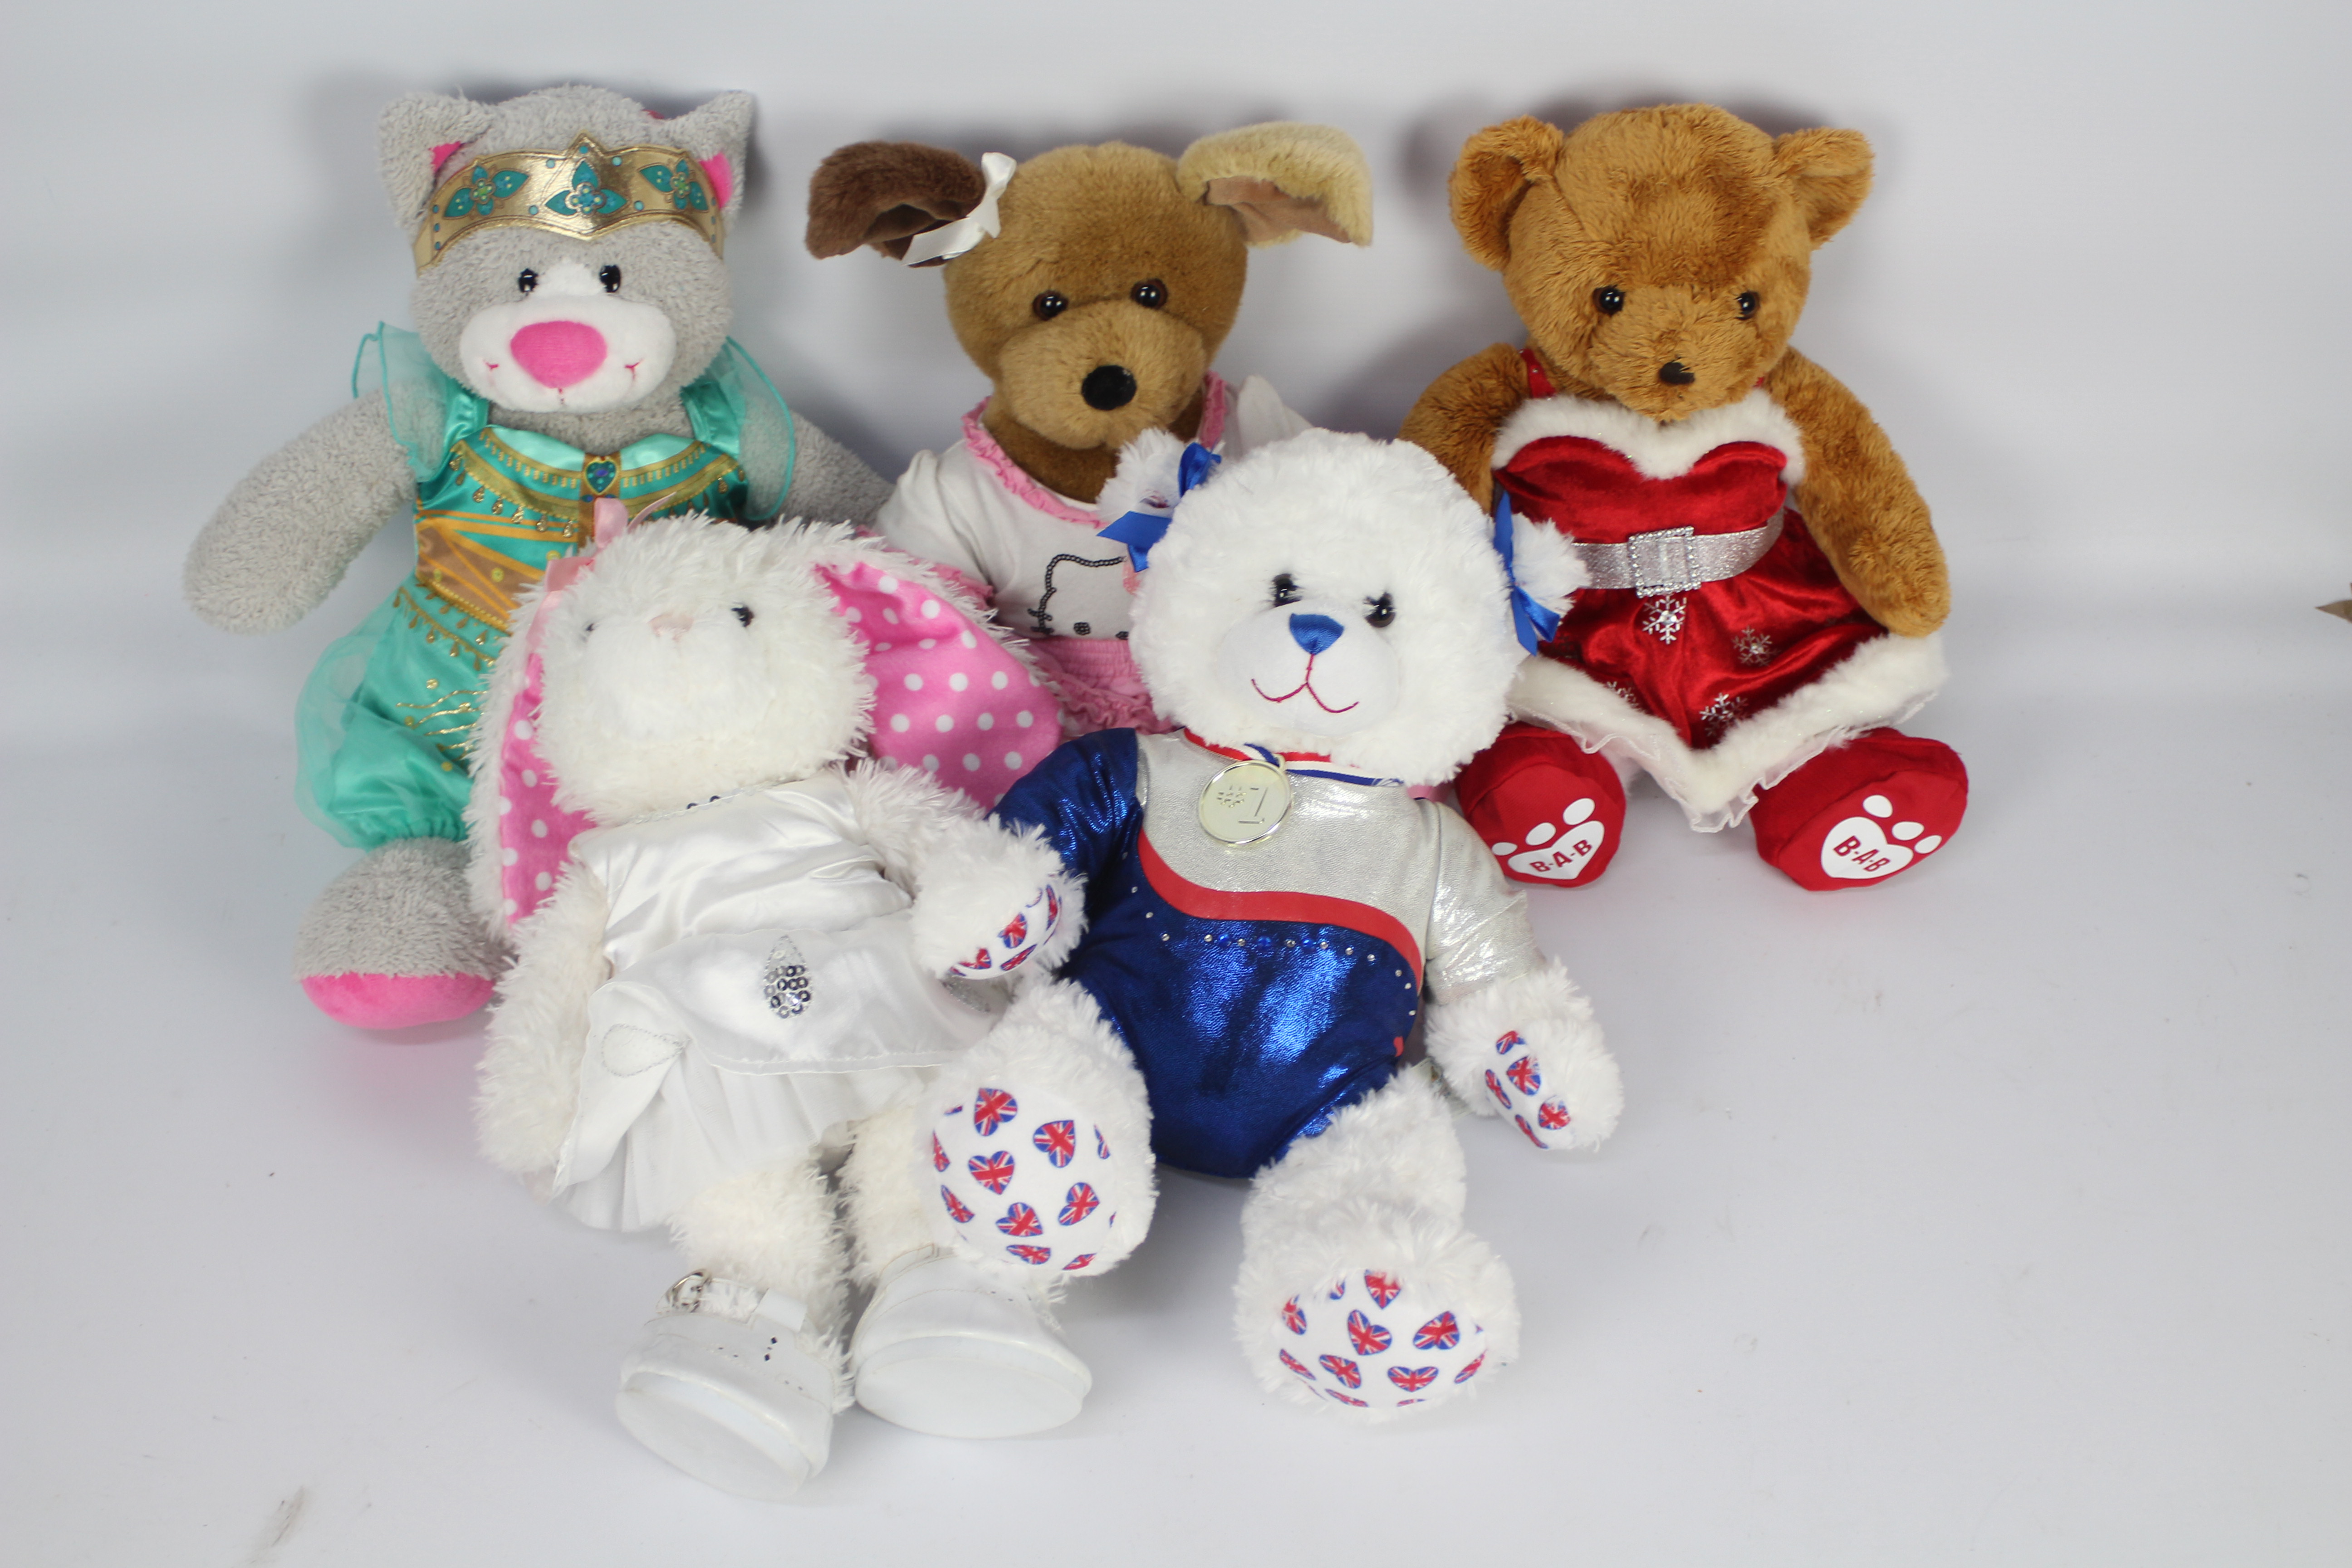 Build-a-Bear - 4 bears + 1 other, to include a brown bear wearing a Christmas dress and red shoes.